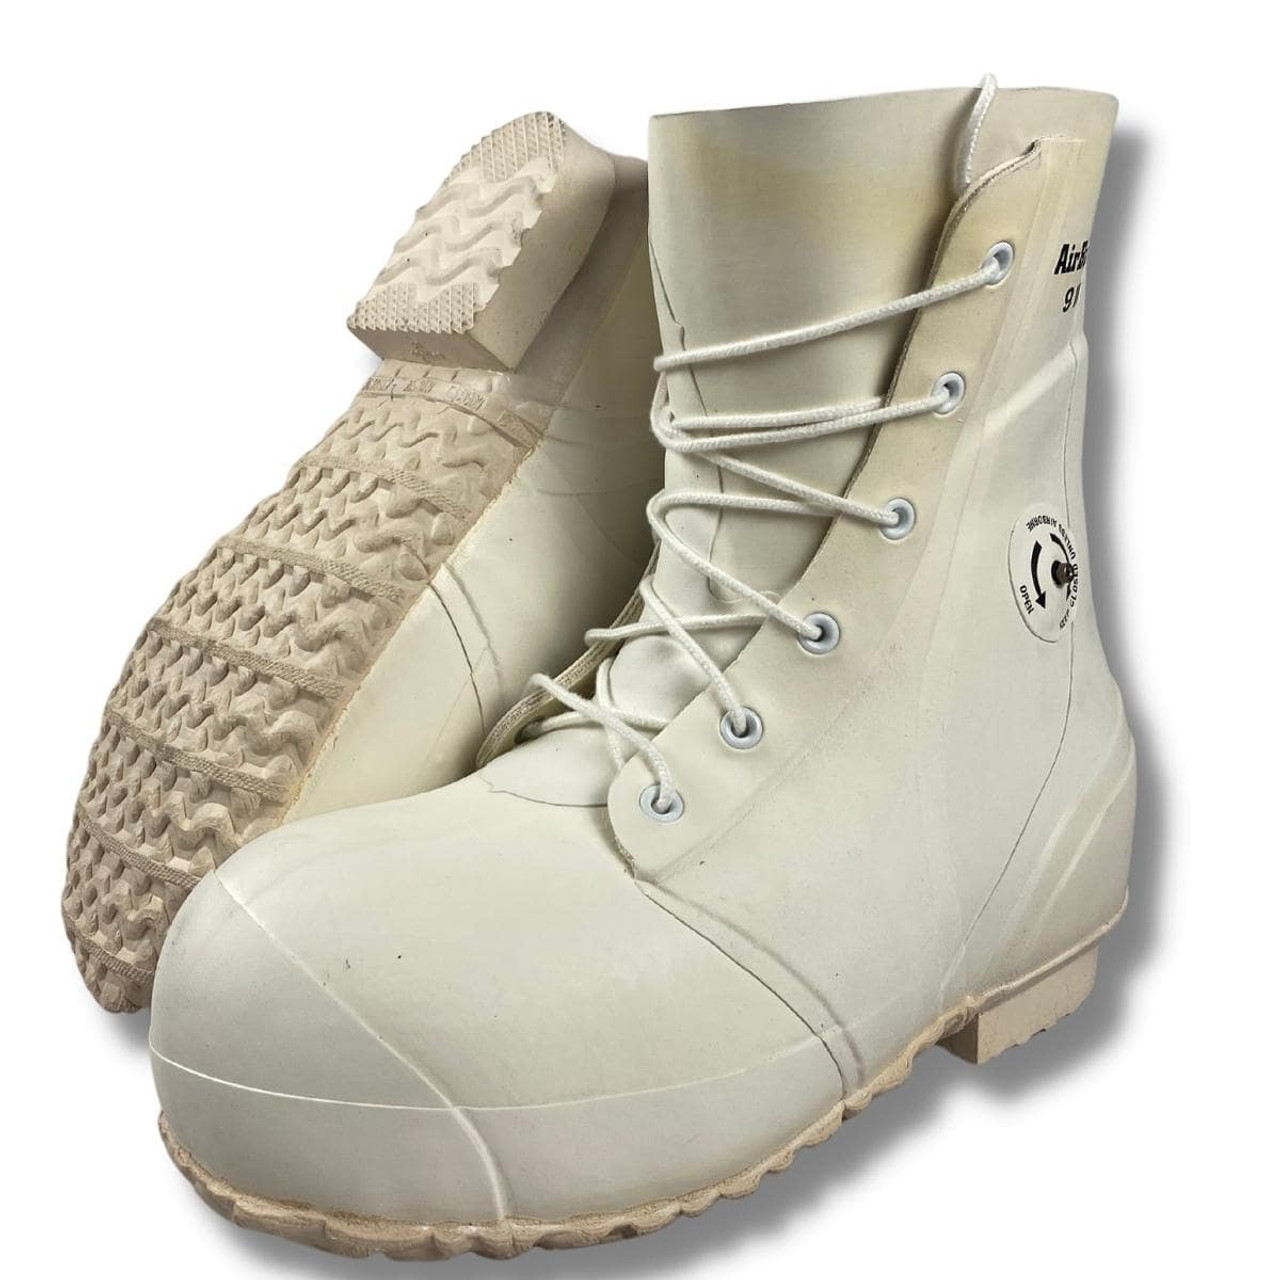 New, White Mickey Extreme Cold Weather Bunny Boots